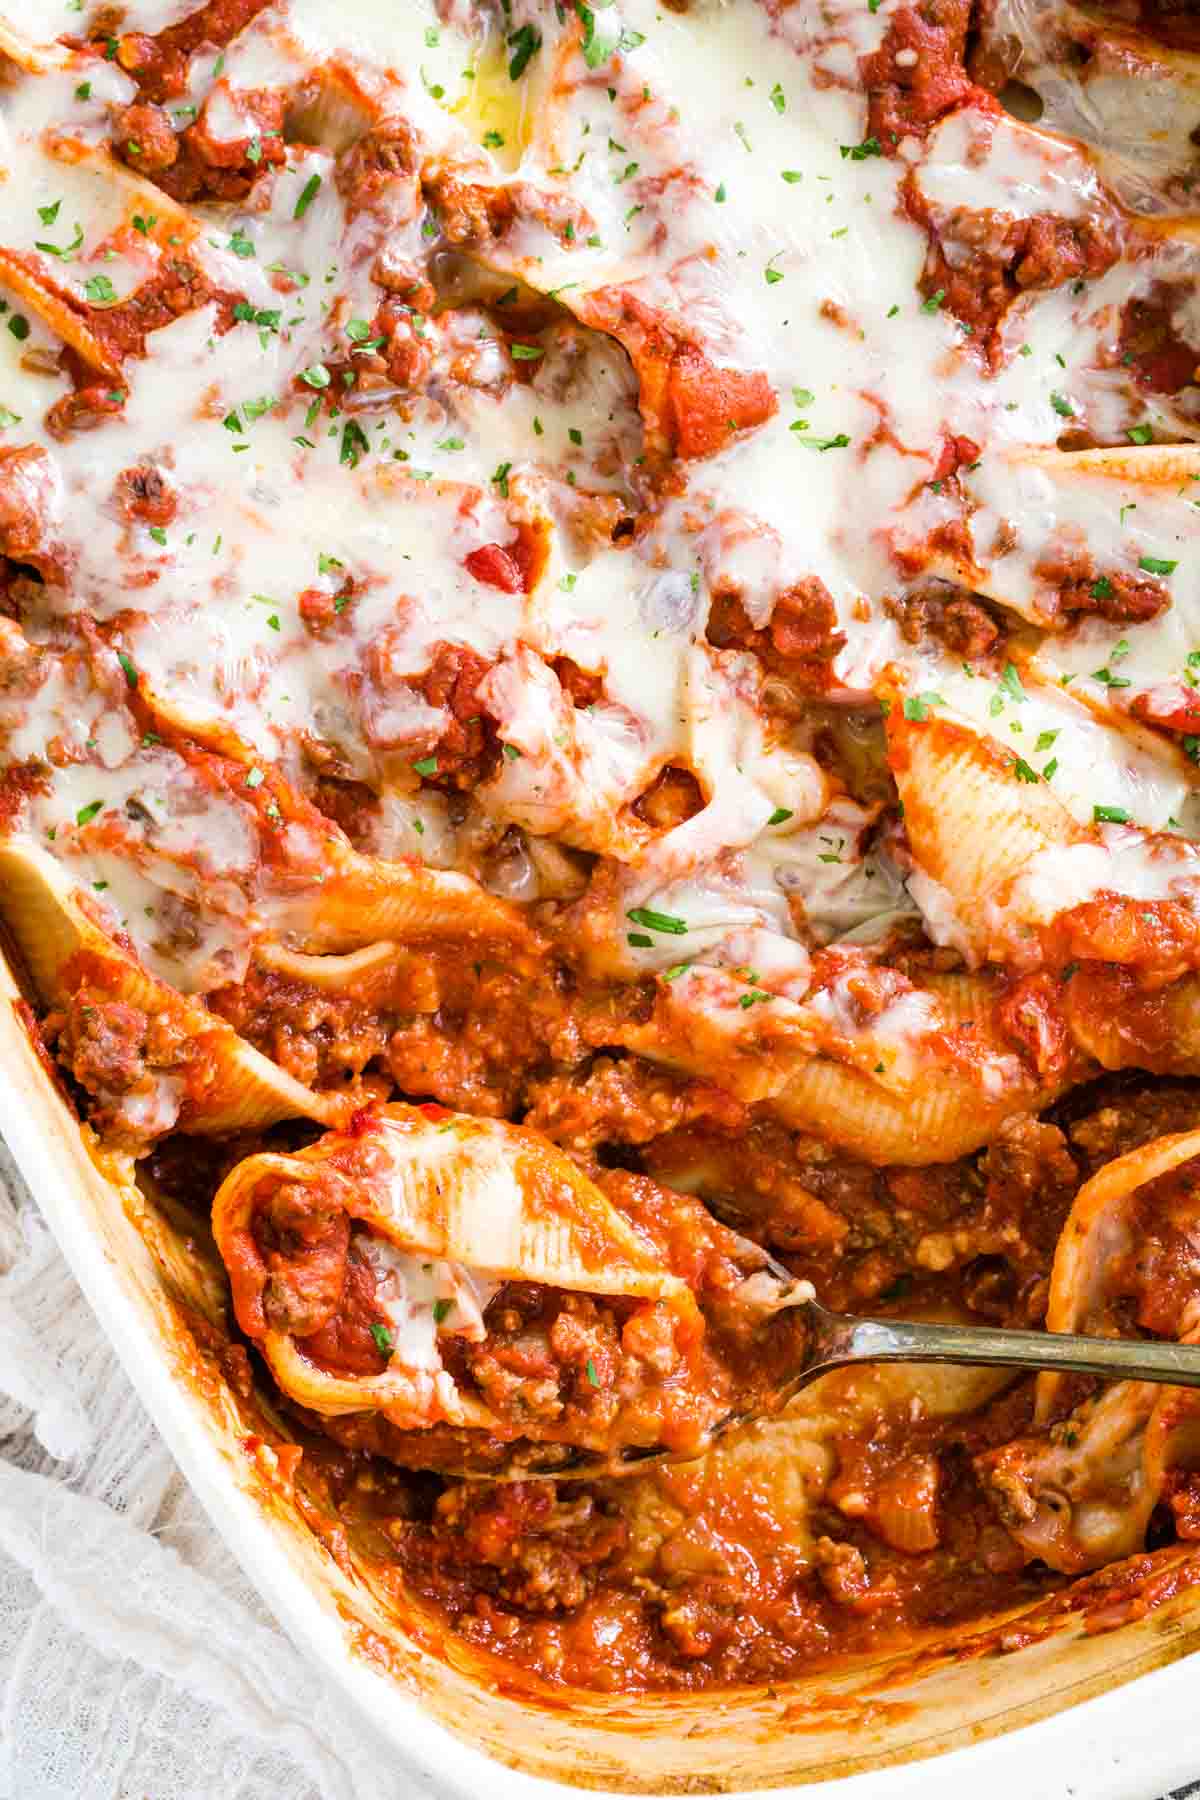 Gluten-free stuffed shells in a casserole dish with a serving missing from the corner.